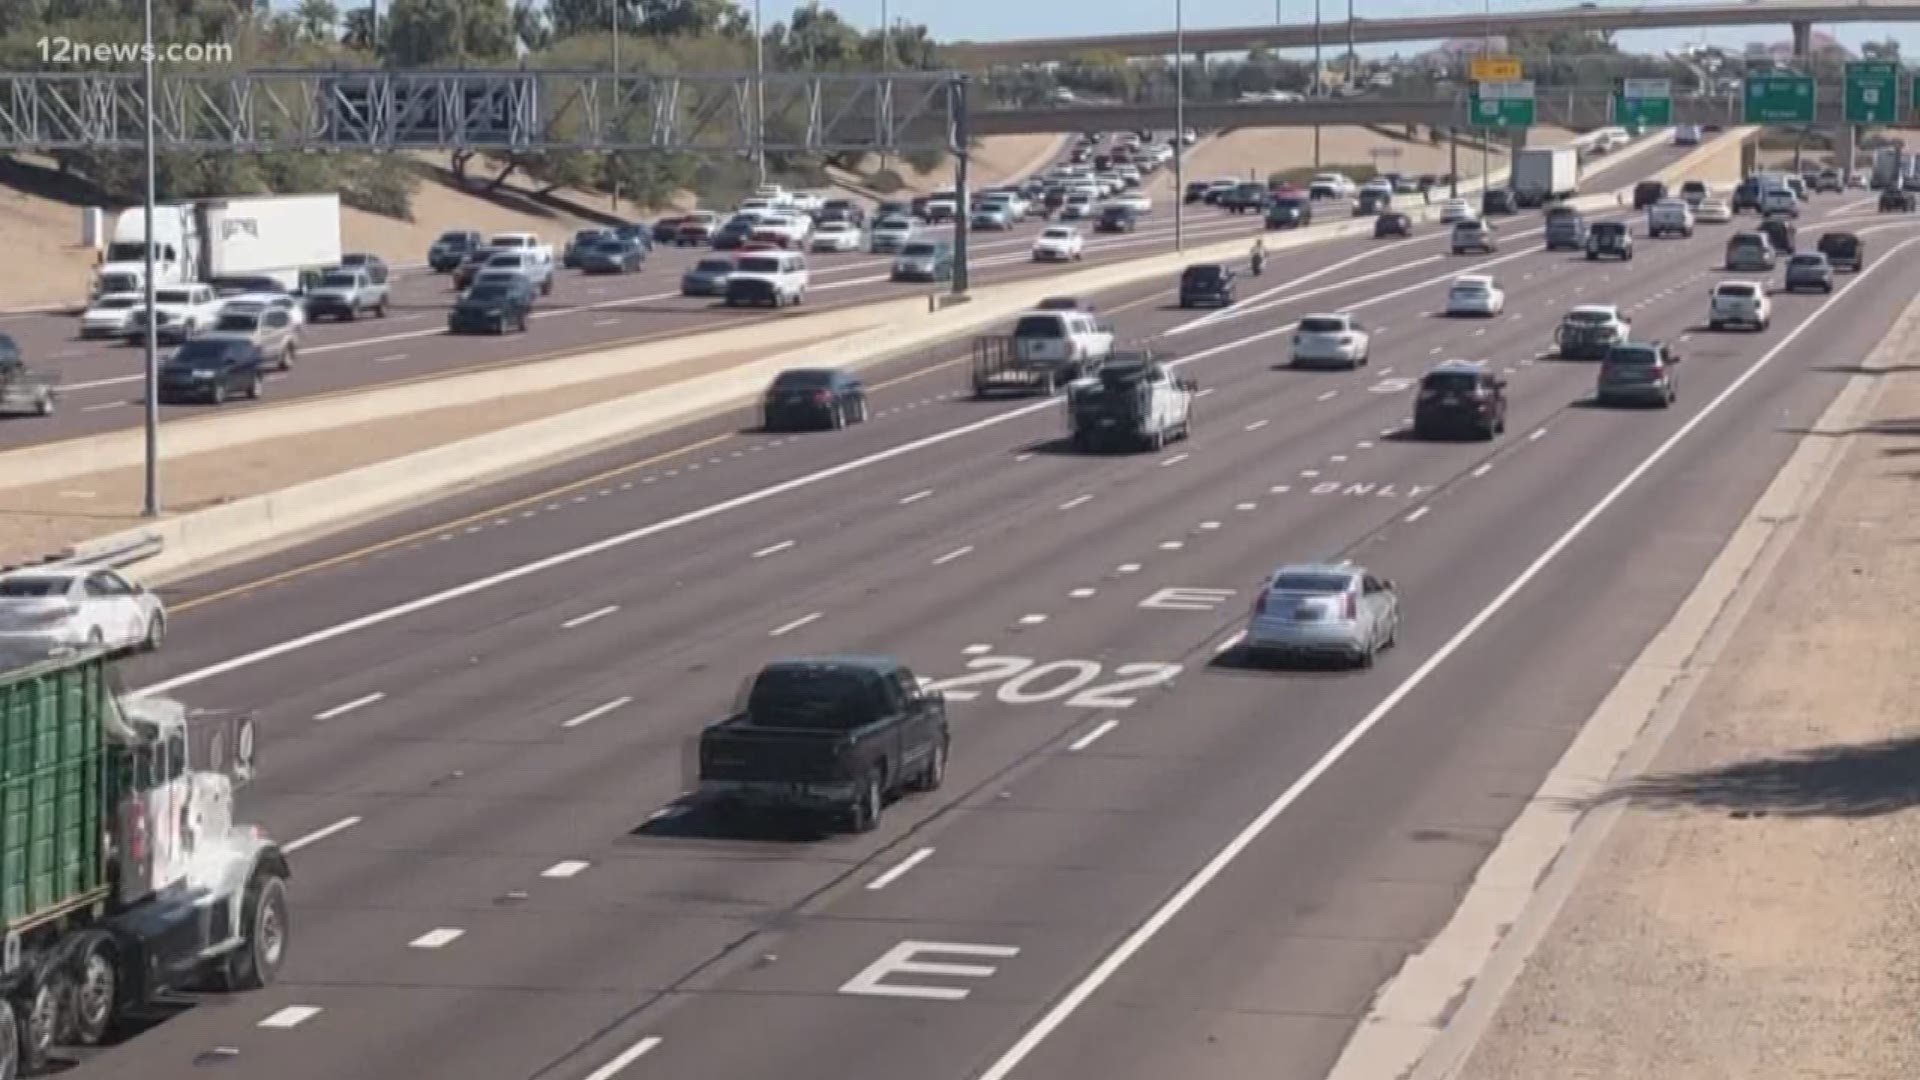 One of the busiest freeways in the state of Arizona is going to be shut down this weekend for a commercial being shot by Nissan. Rolling closures will take place Saturday through Monday.